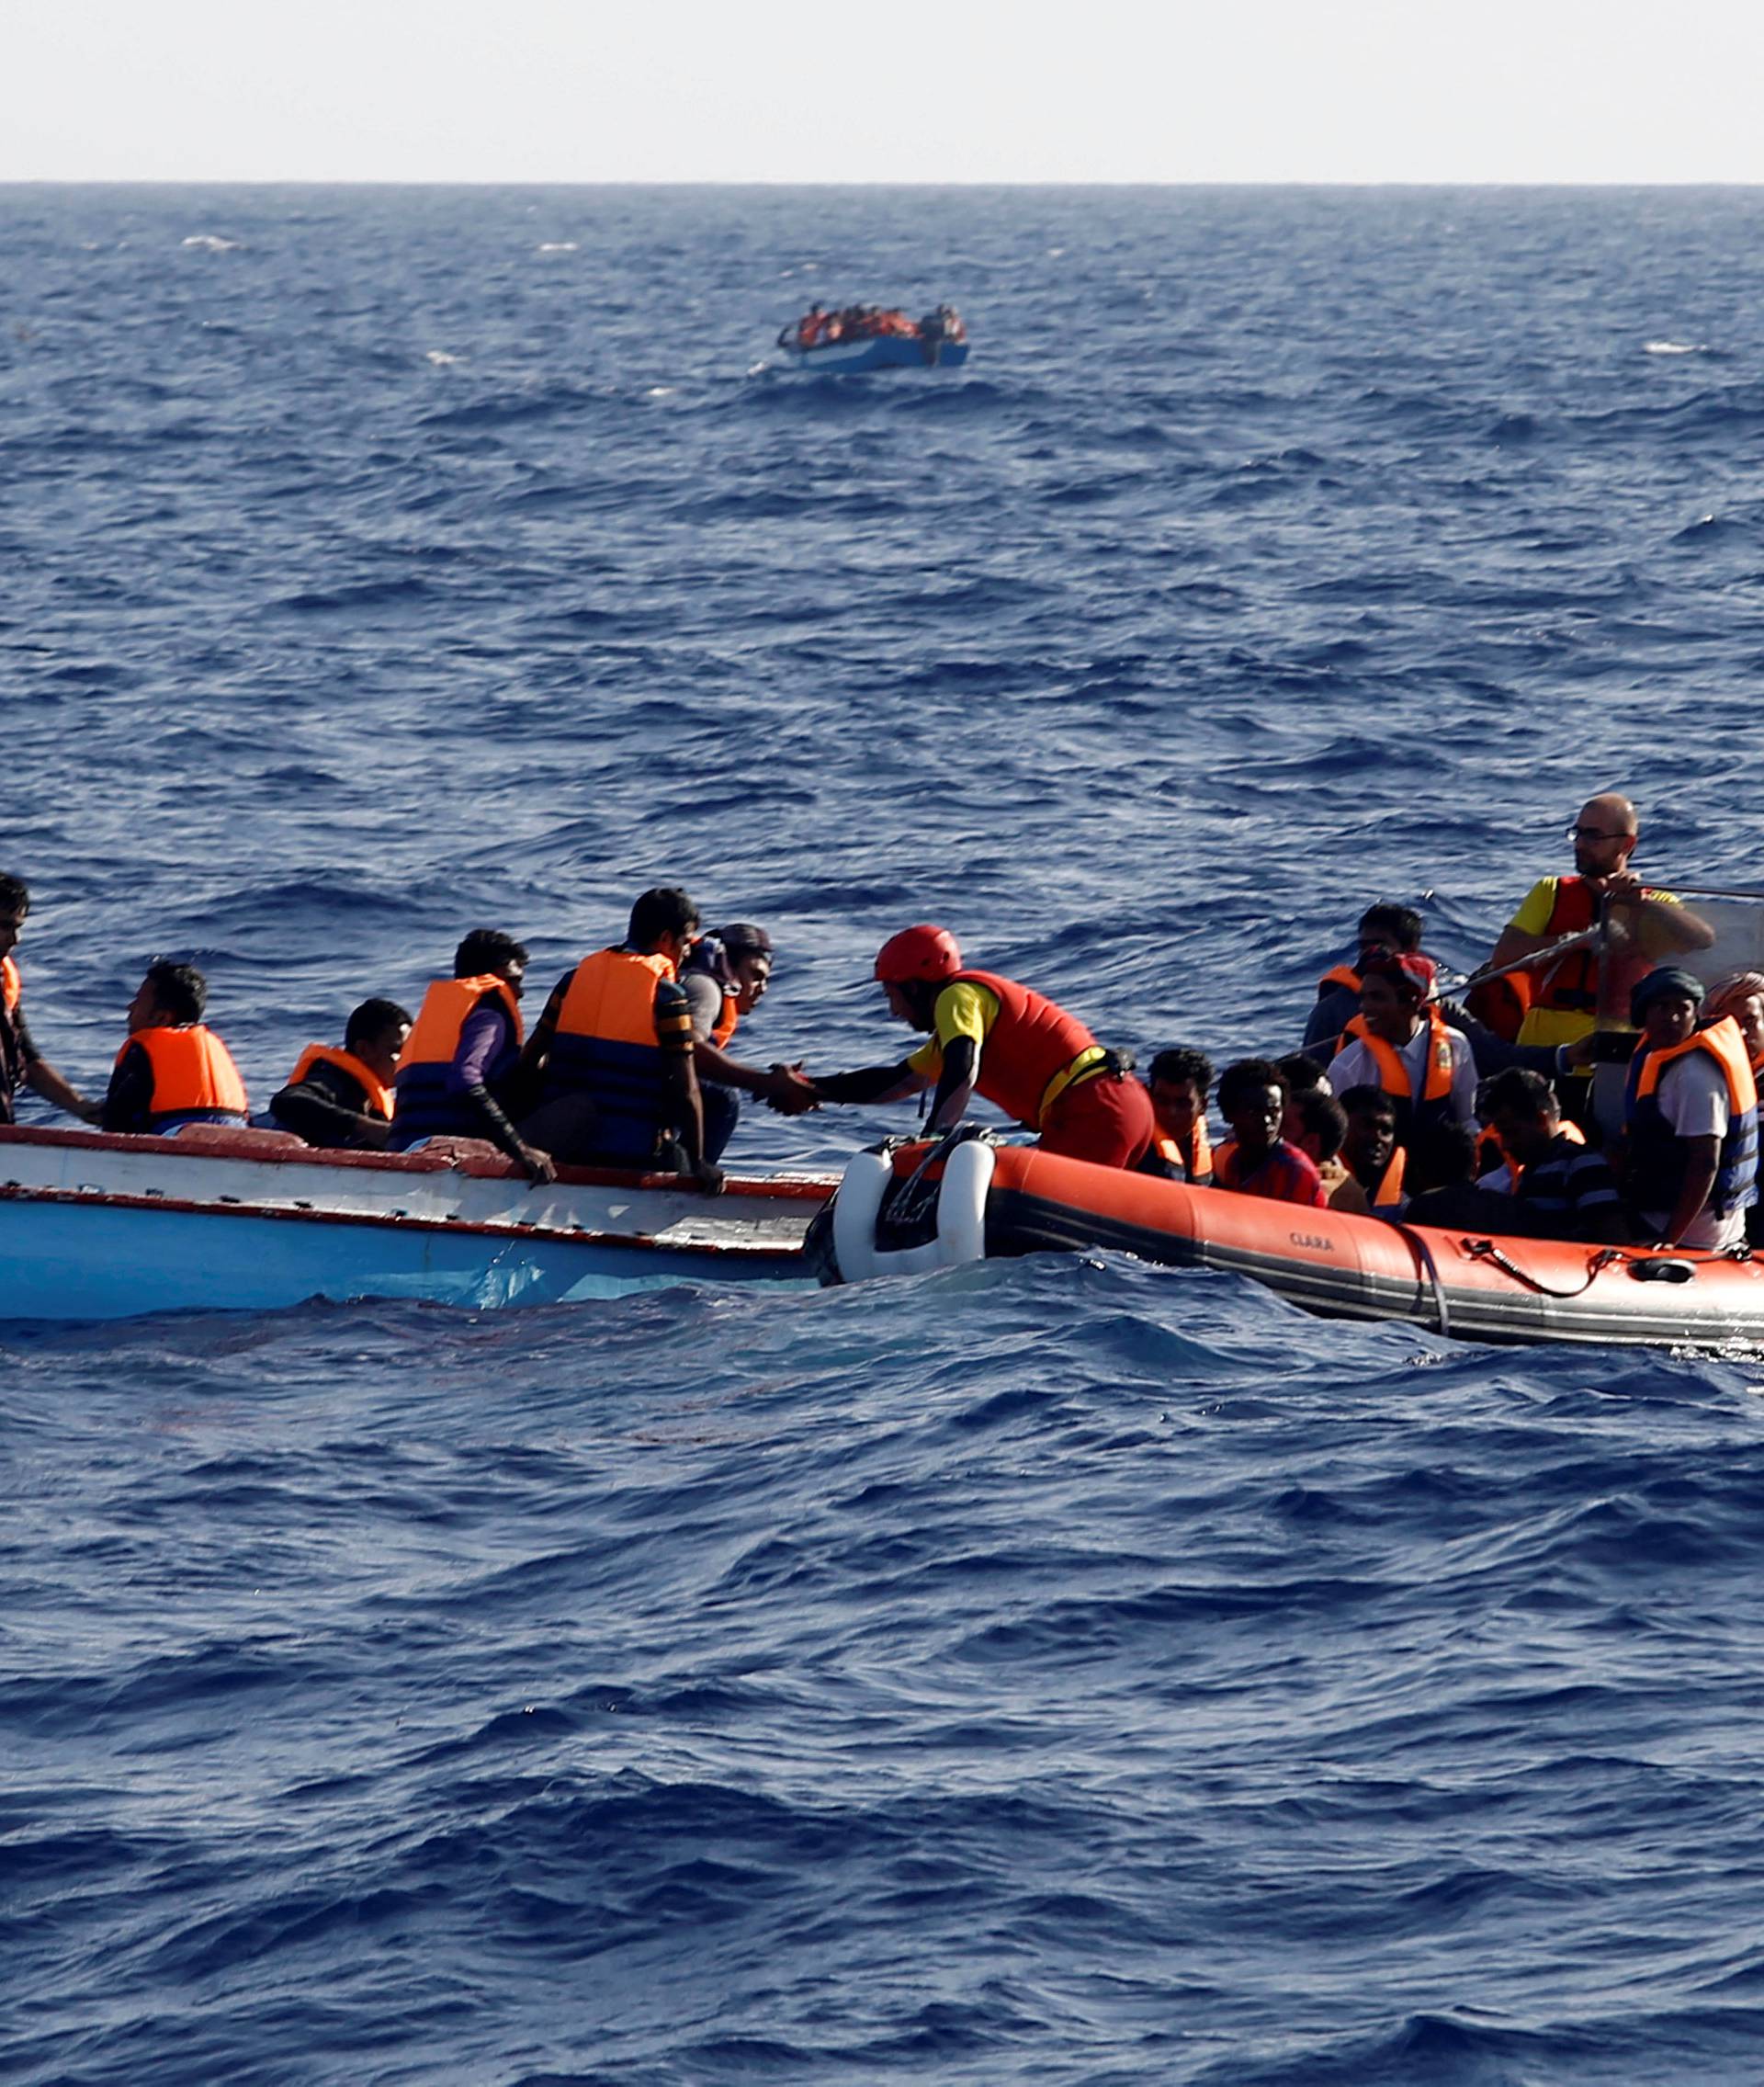 An inflatable boat from the Spanish vessel Astral operated by the NGO Proactiva collects migrants off the Libyan coast in the Mediterranean Sea